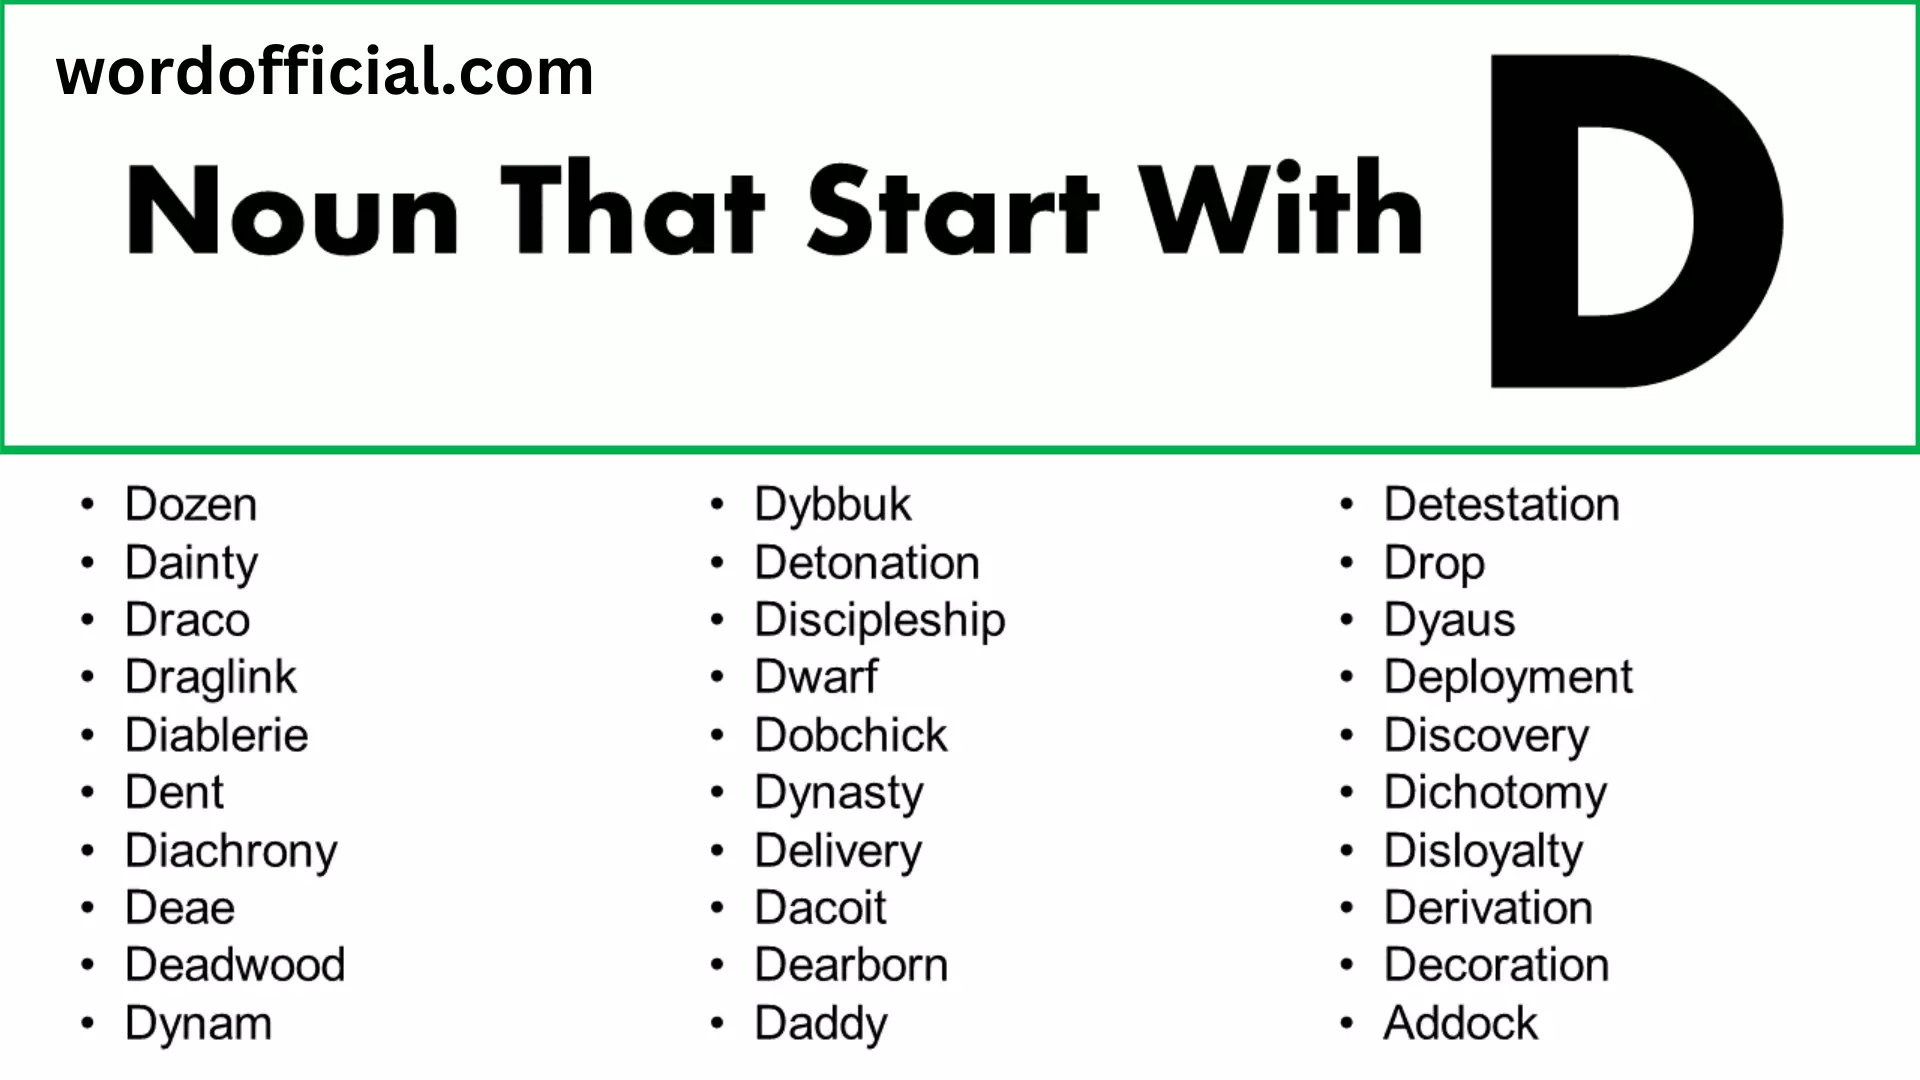 249+List Of Nouns That Start With D